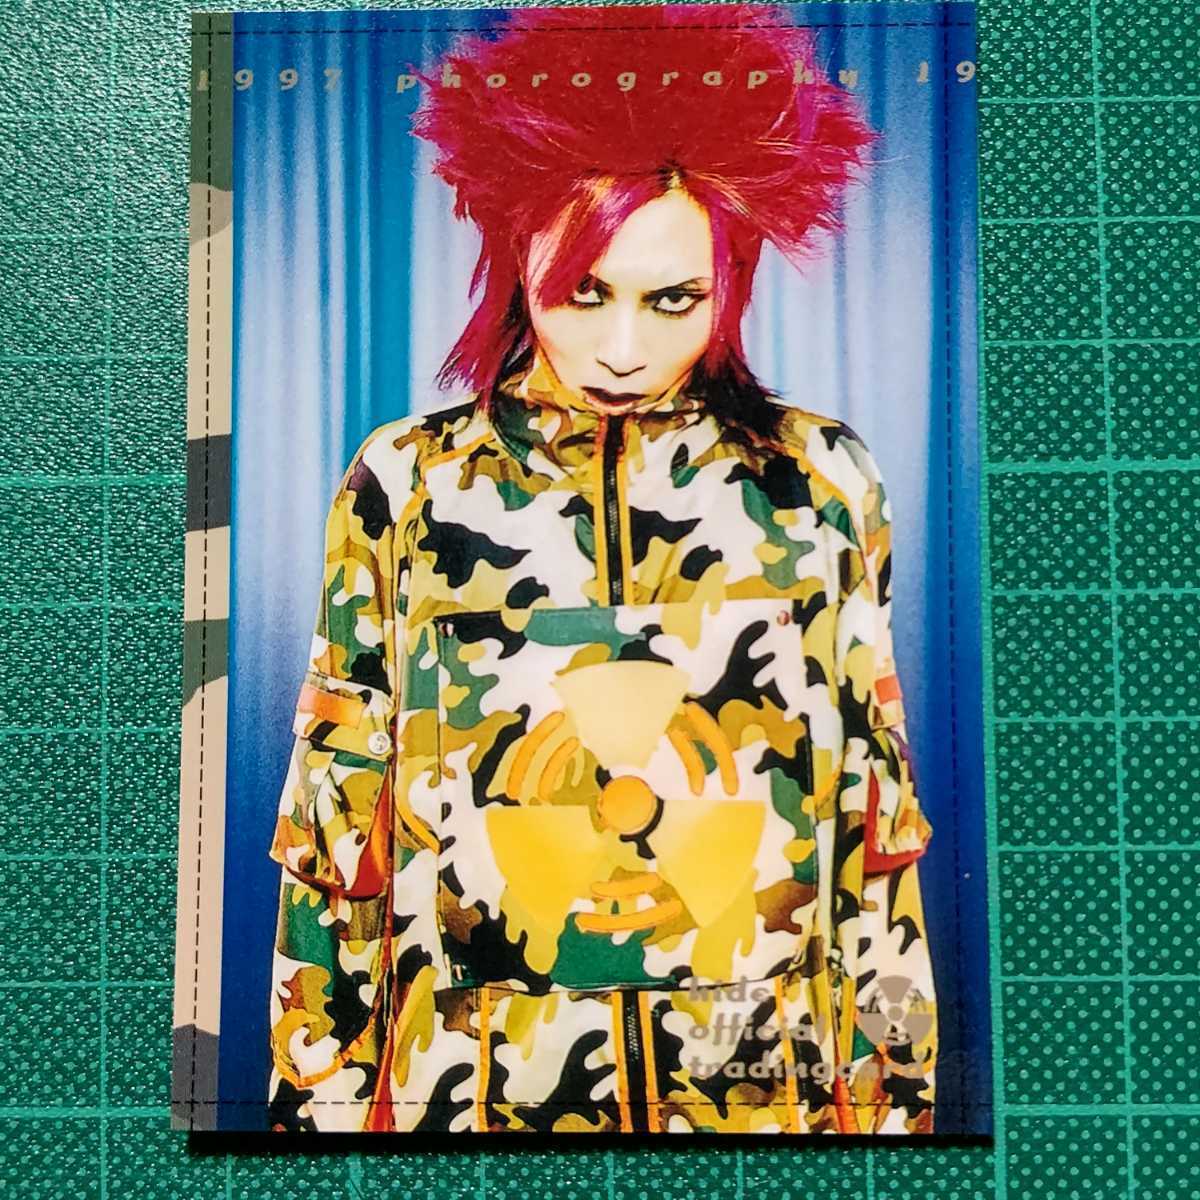 hide trading card No.059 59 / inspection PSYENCE HIDE YOUR FACE hide with spread beaver Zilch XJAPAN T-shirt poster YOSHIKI Toshl